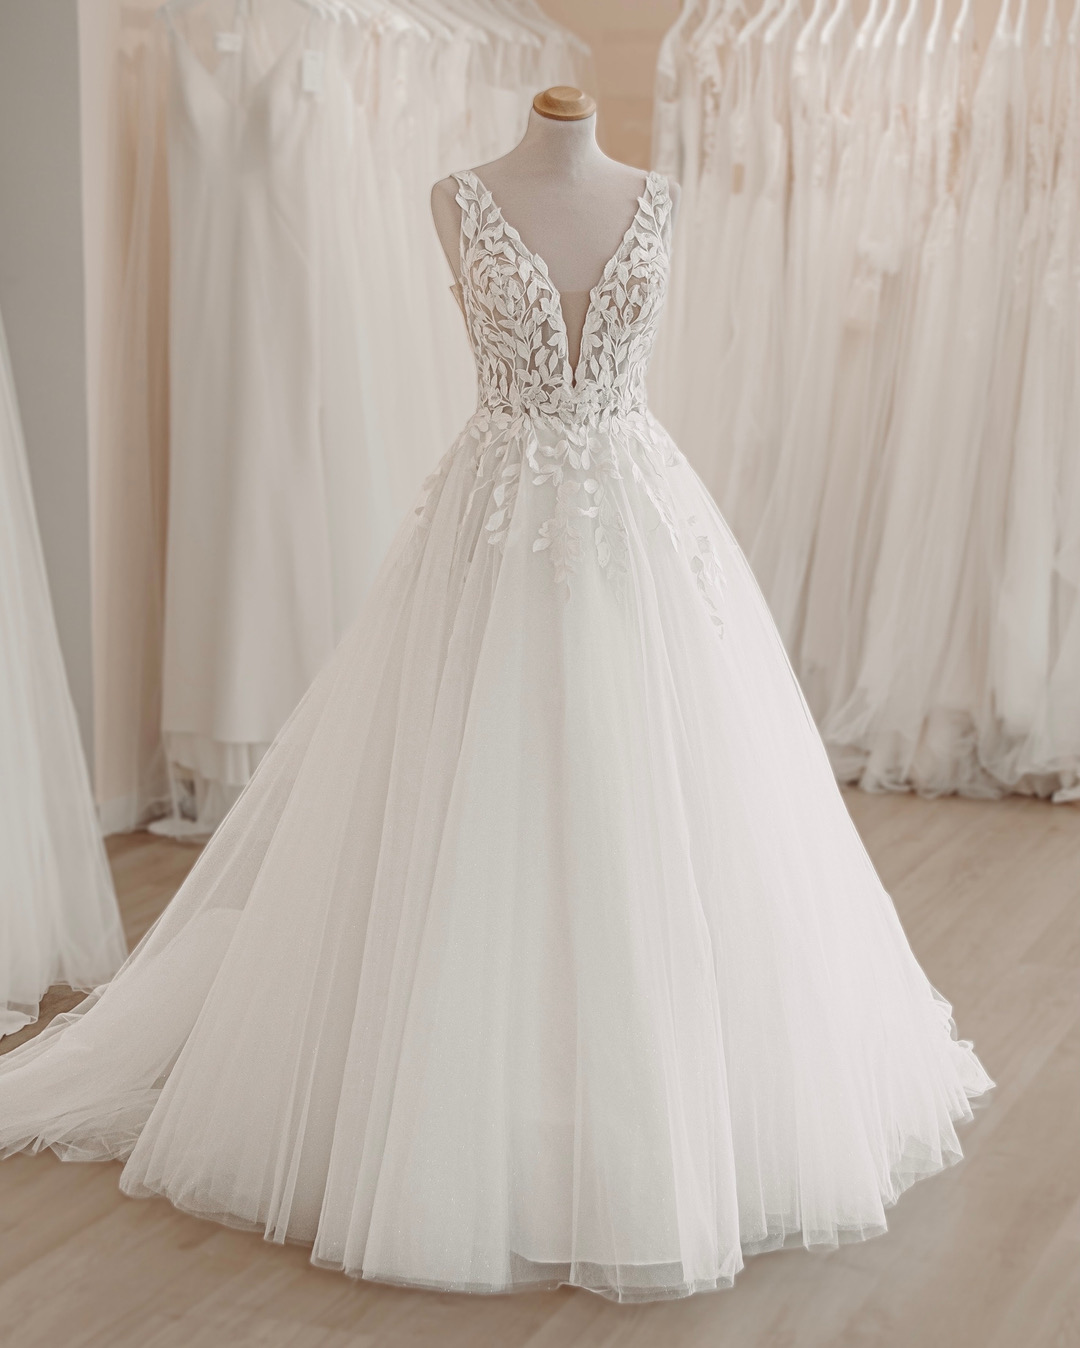 Lace Wedding Dresses, 2024 Wedding Dresses, Lace Appliques Wedding Dresses, Sheer Bodice Bridal Dresses, 2024 Deep V Neck Wedding Gowns, Tulle